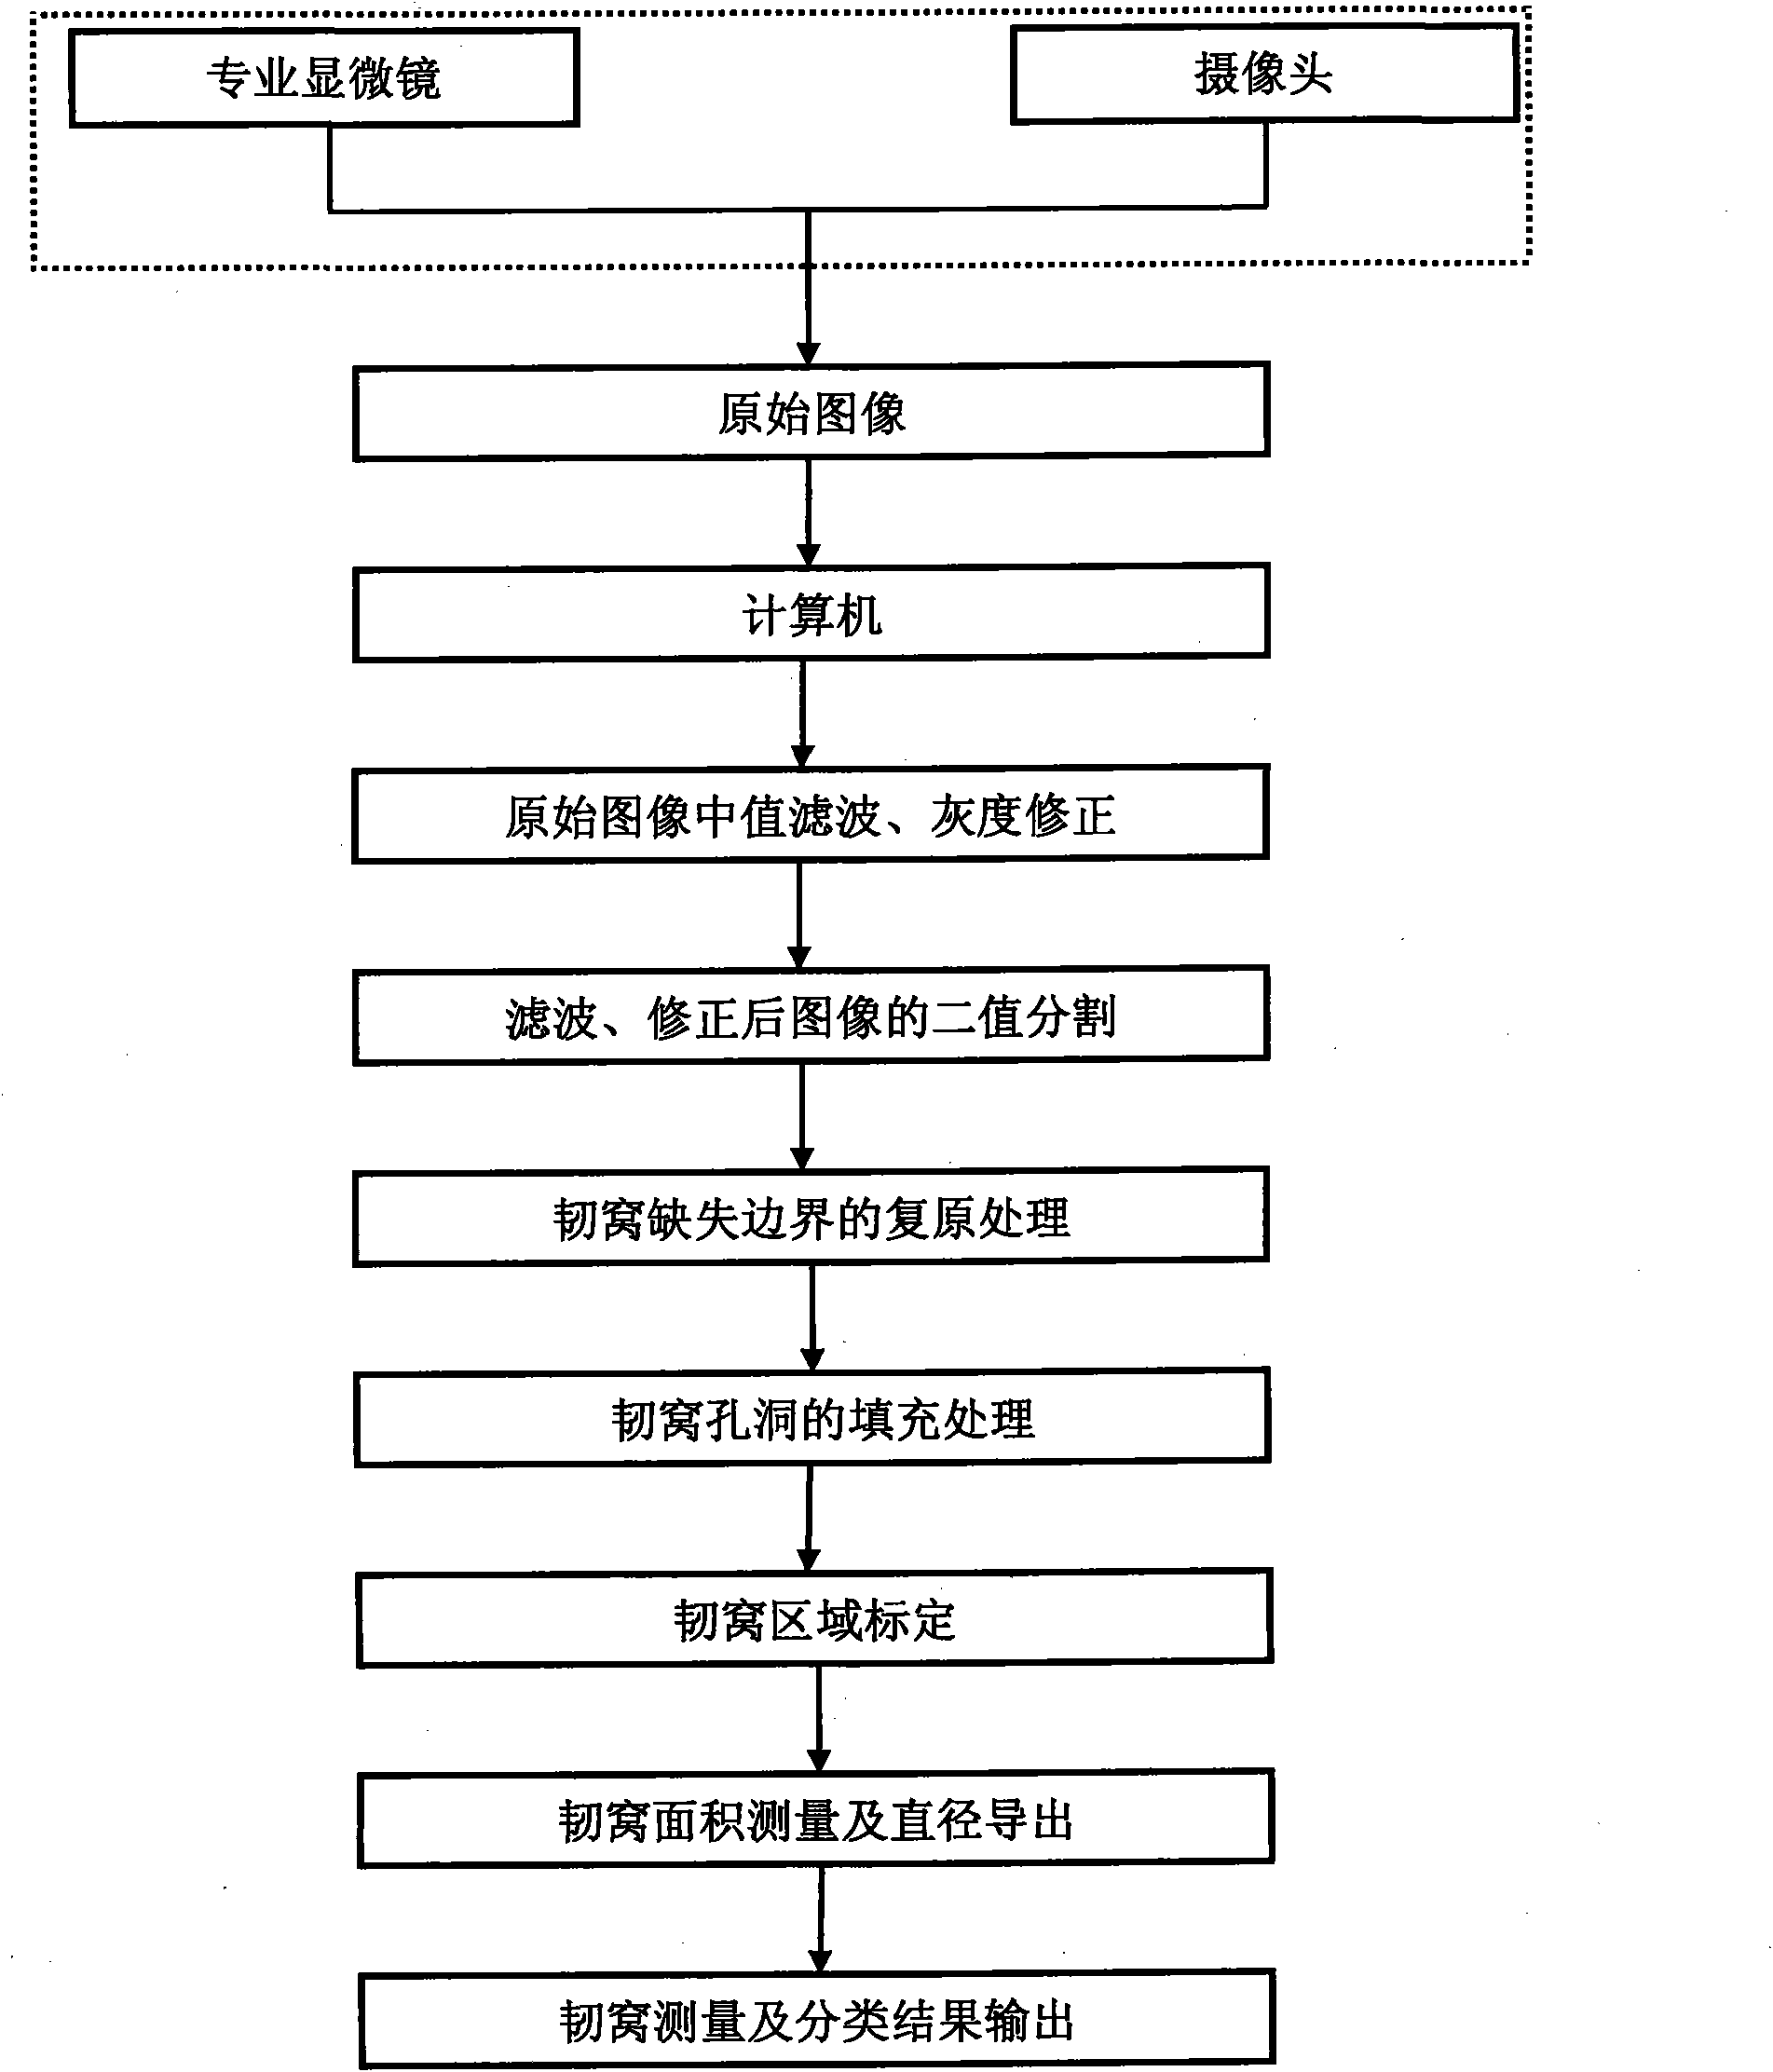 Method and device for automatically restoring, measuring and classifying steel dimple images